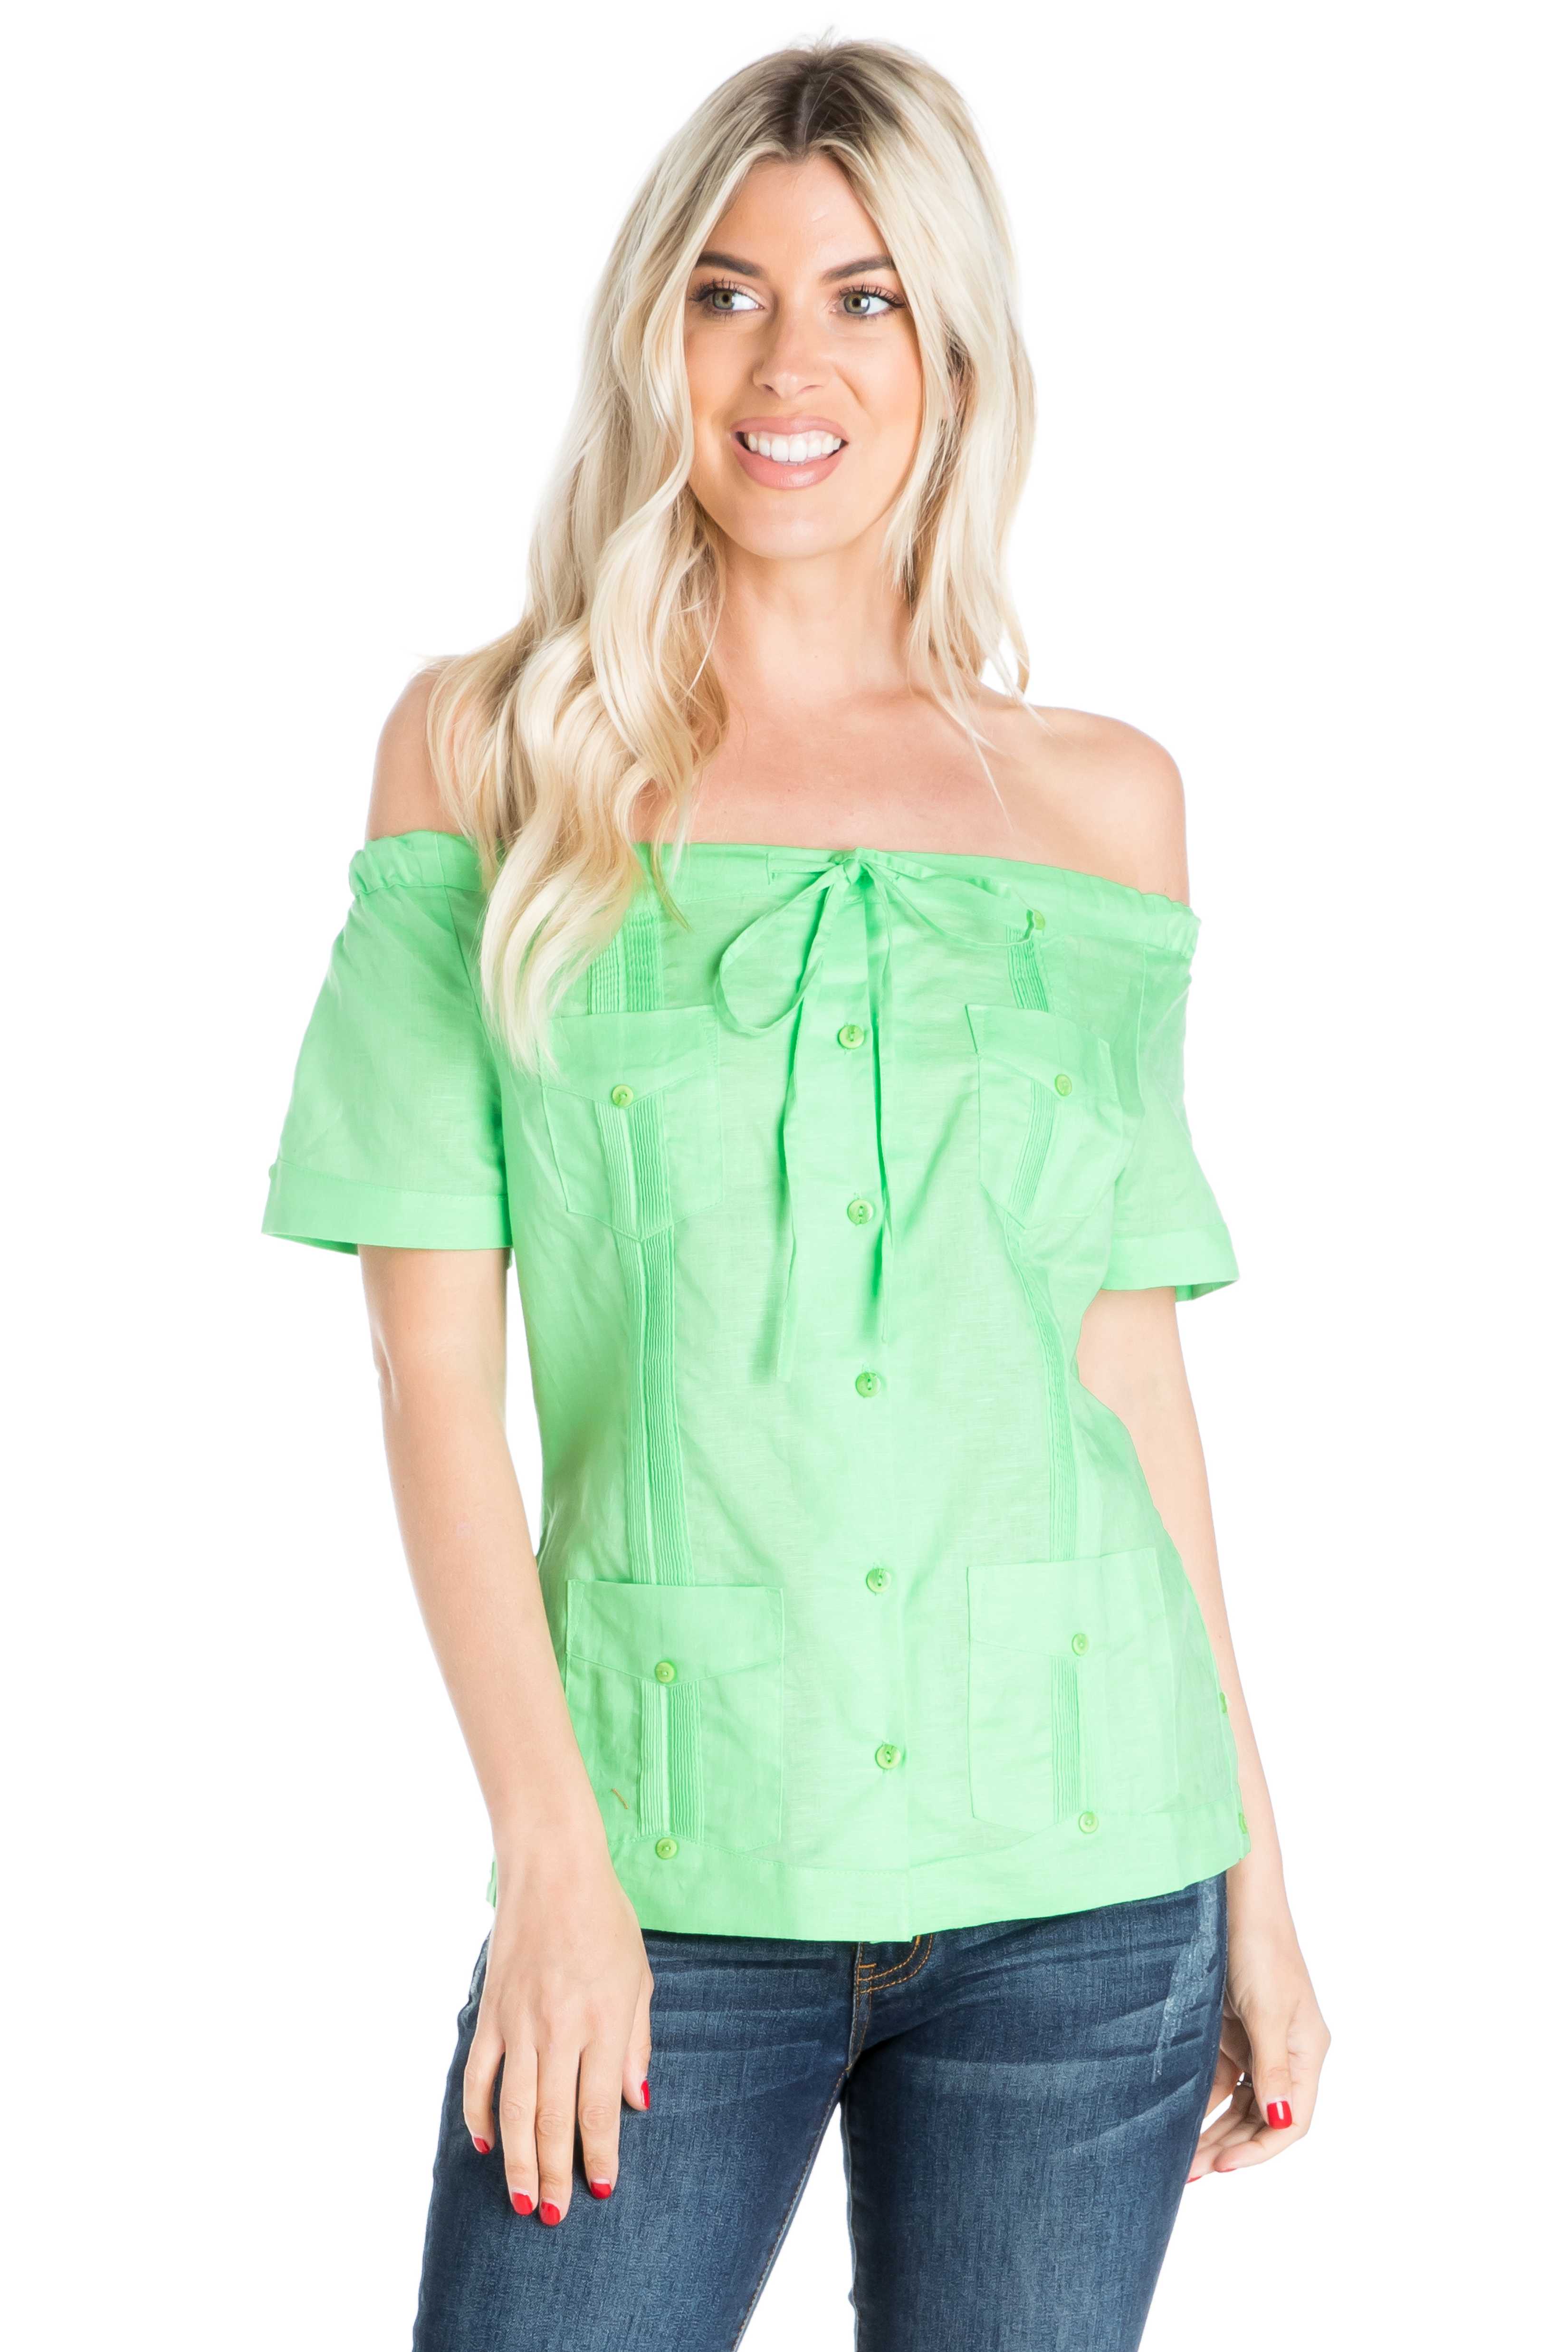 Women's Sexy Guayabera Off-Shoulder Top Button Down Linen Blend S-2X - Mojito Collection - Guayabera Halter Top, Mojito Guayabera Shirt Women, Womens Guayabera Shirt, Womens Shirt